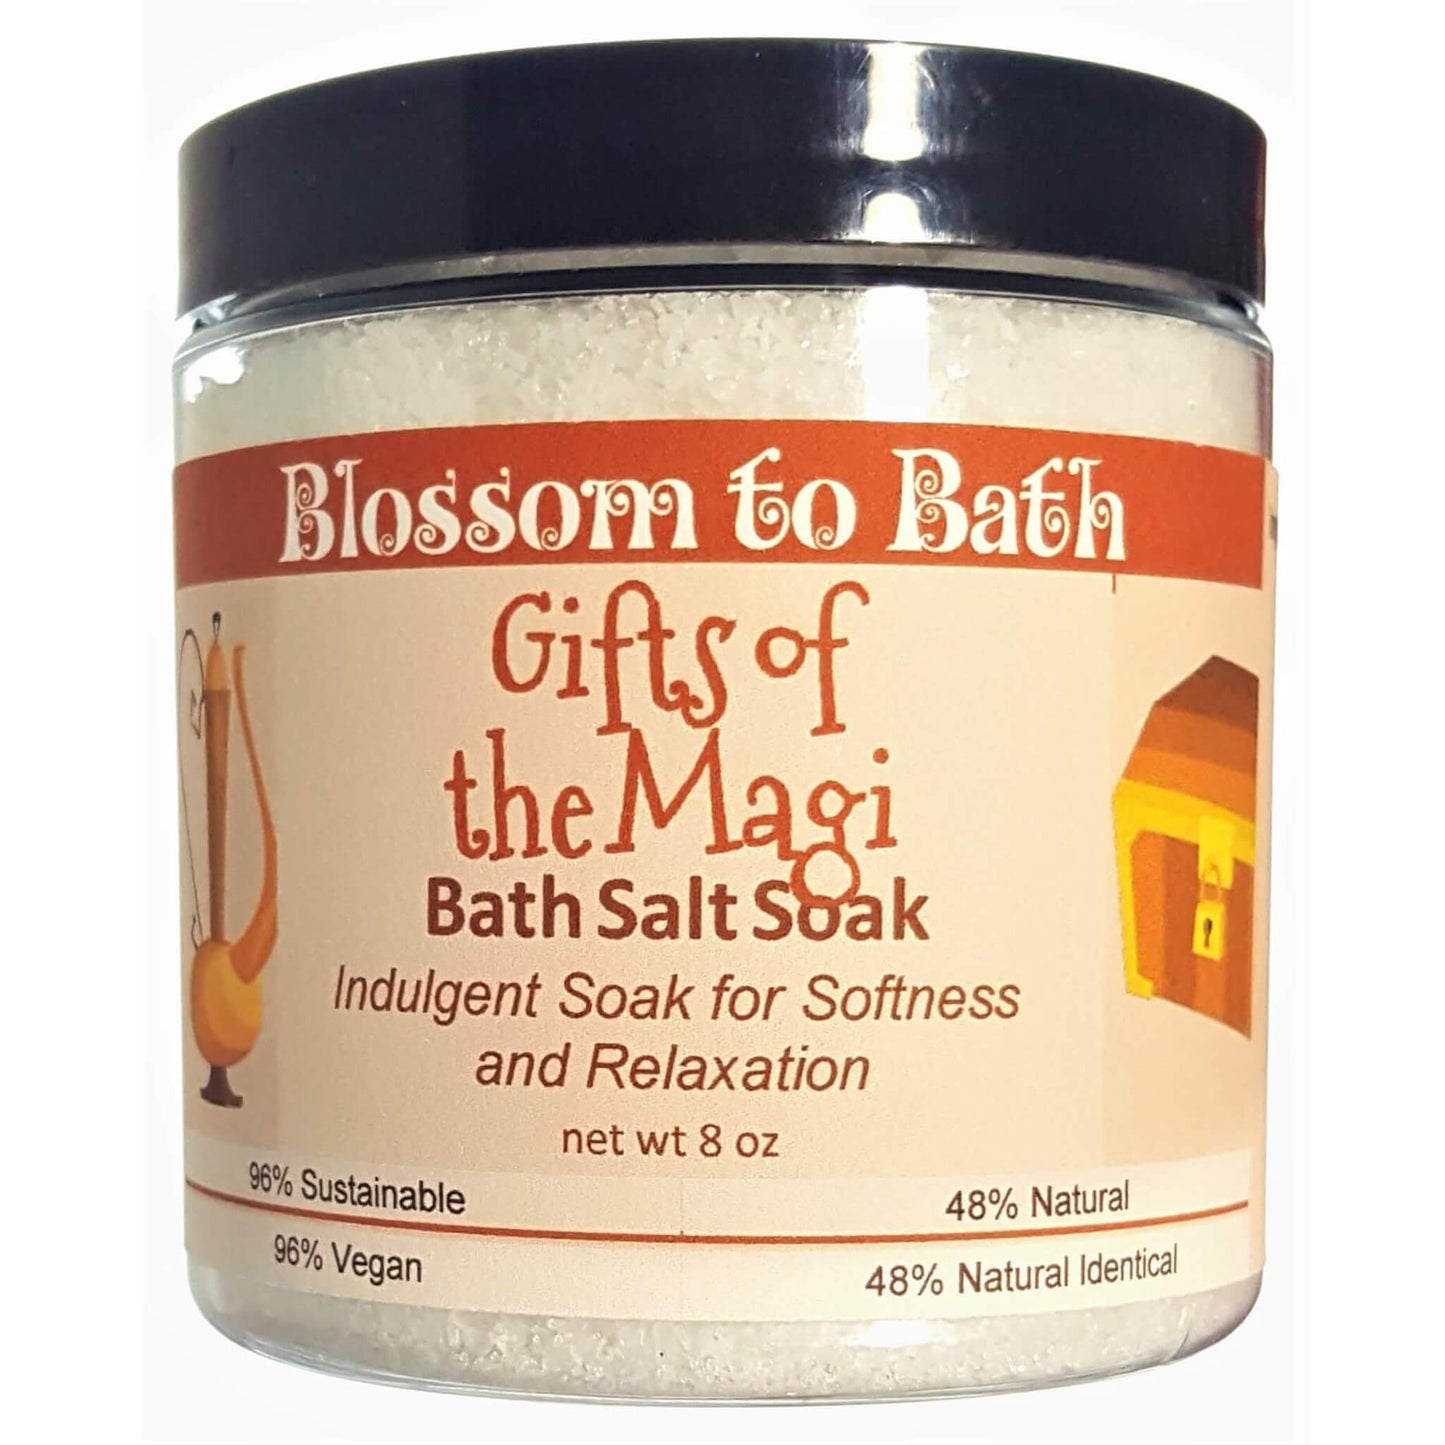 Buy Blossom to Bath Gifts of the Magi Bath Salt Soak from Flowersong Soap Studio.  Scented epsom salts for a luxurious soaking experience  Celebrate the soulful side of the holiday spirit with warm spices and incense.